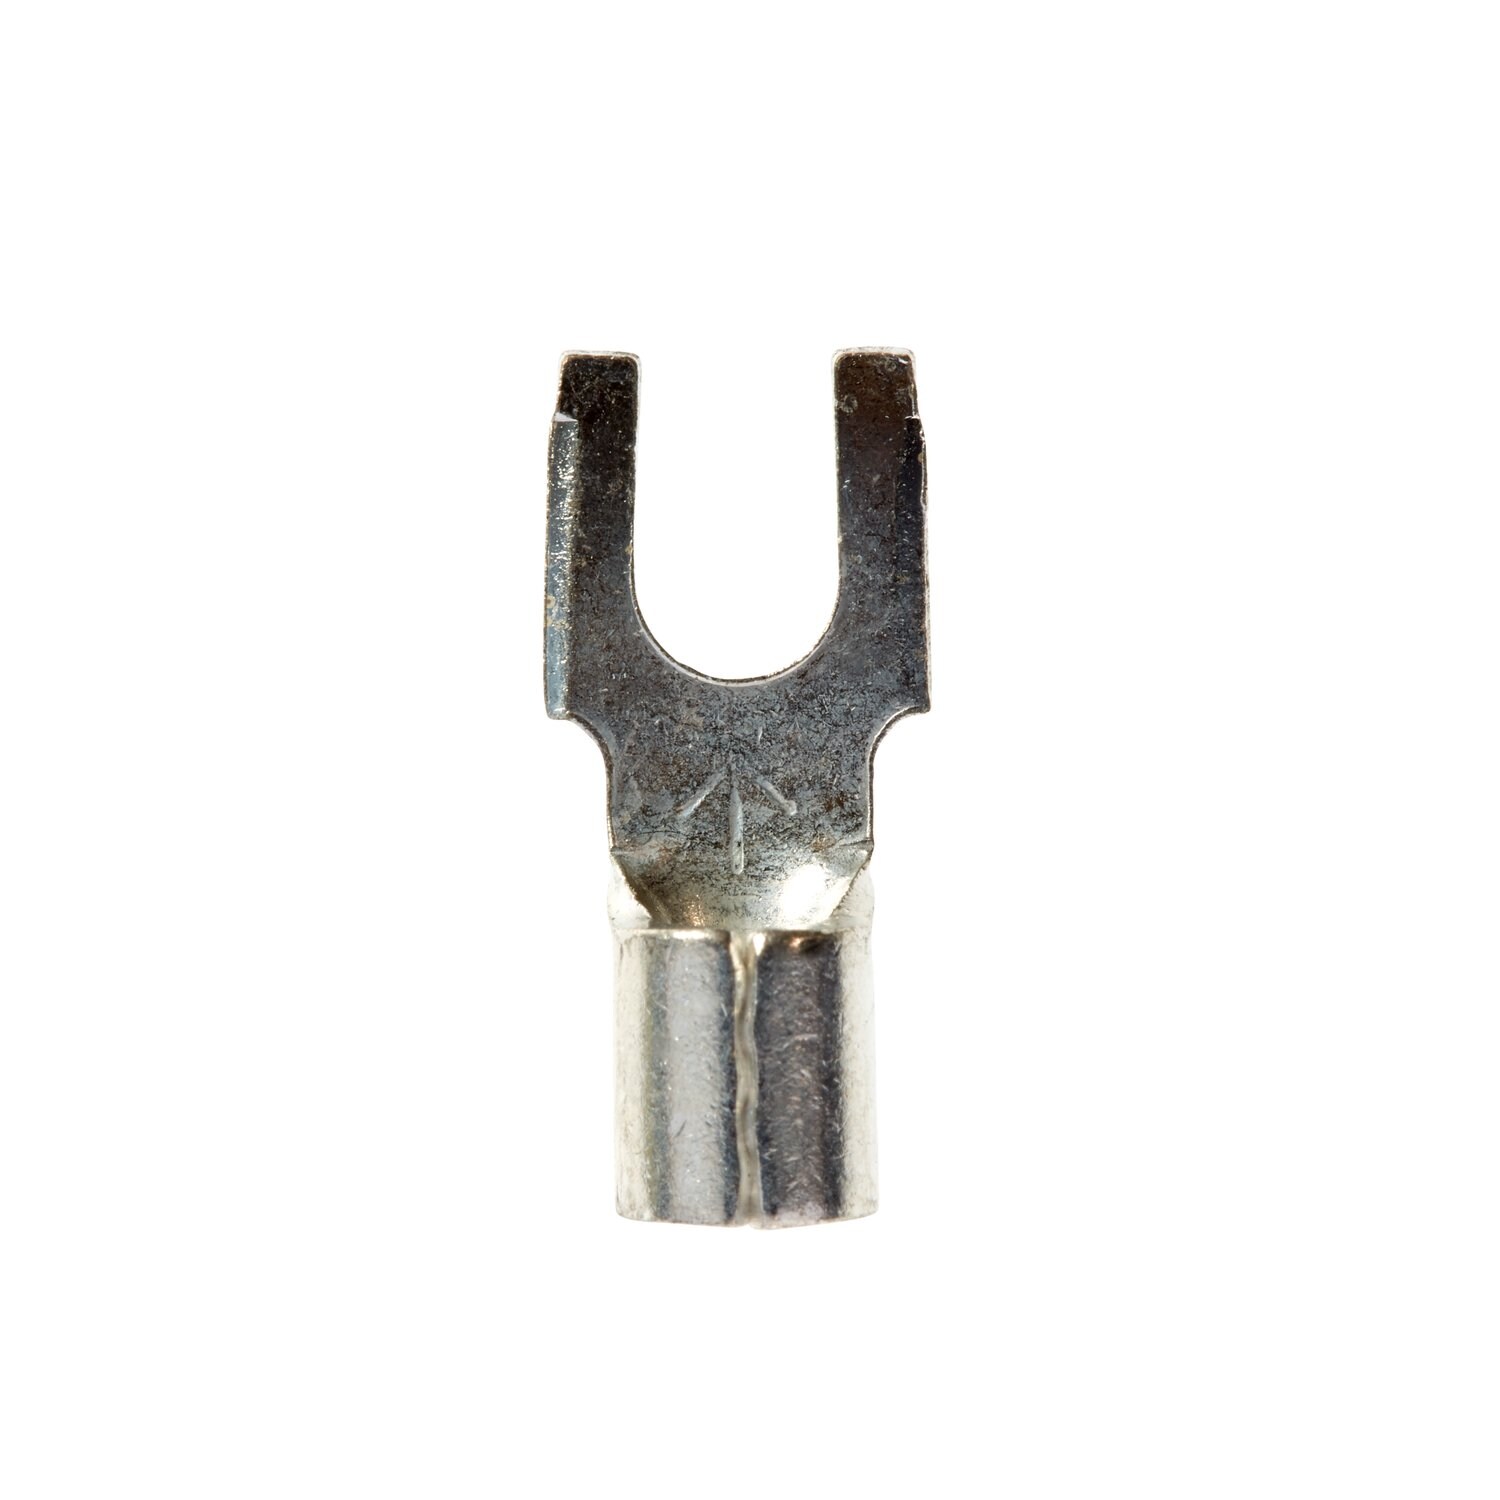 7100164108 - 3M Scotchlok Block Fork, Non-Insulated Butted Seam MU10-8FBK, Stud
Size 8, suitable for use in a terminal block, 500/Case